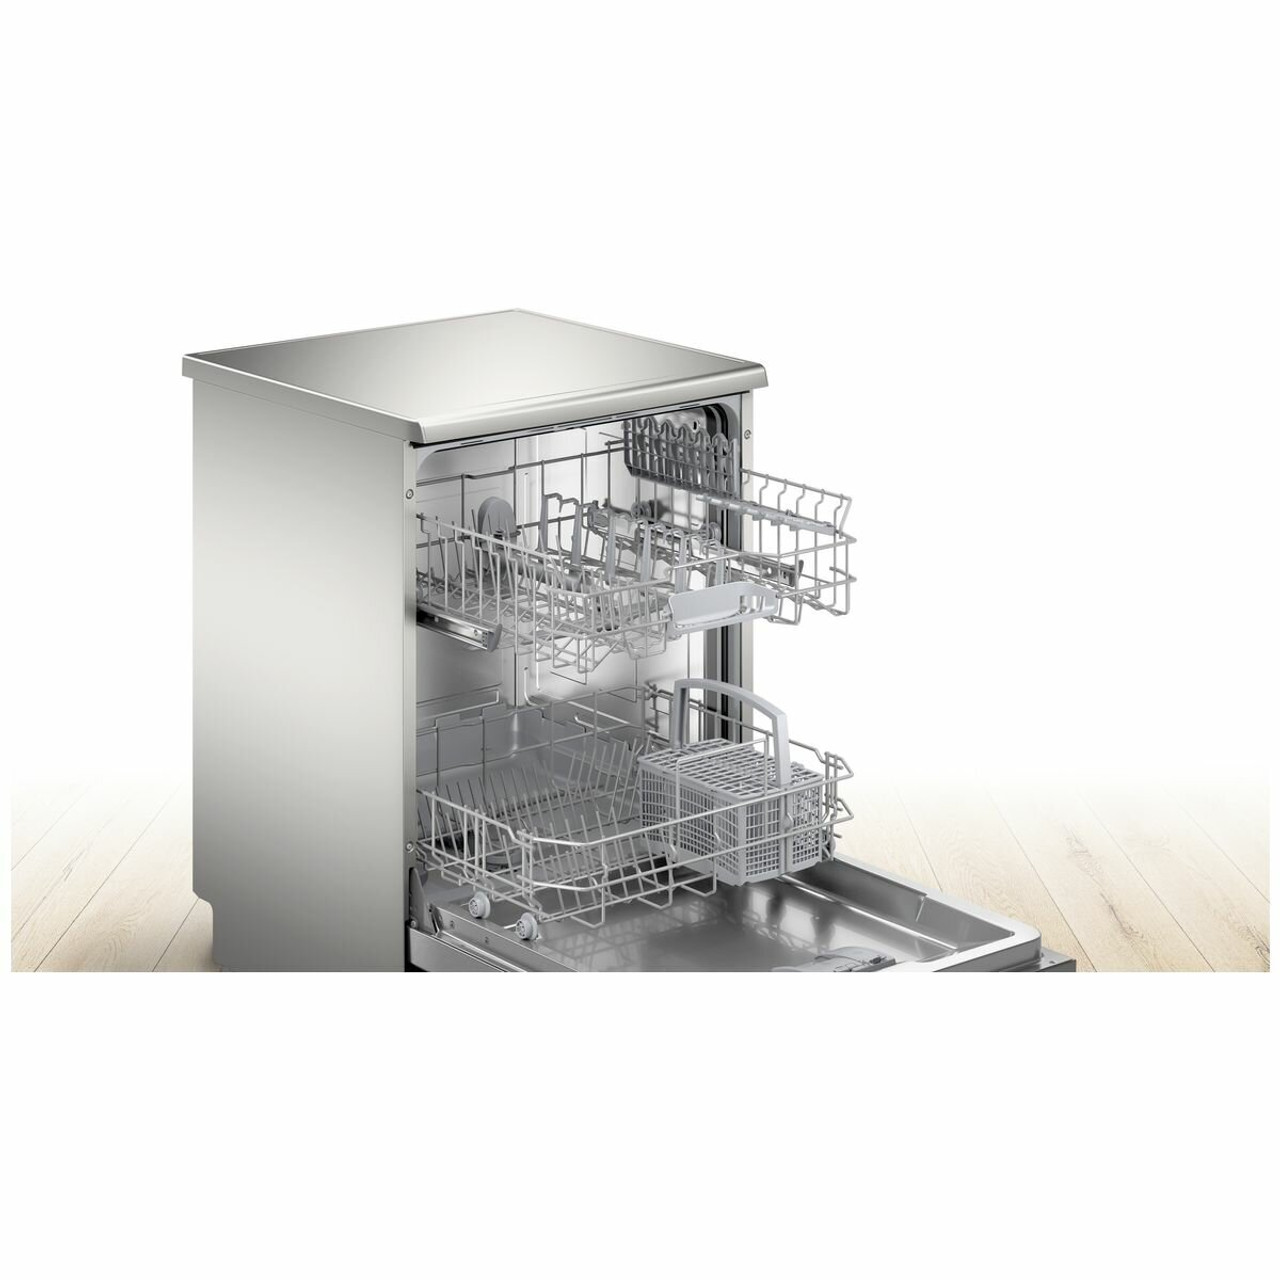 SMS2ITI02A - Series 2 60cm Freestanding Dishwasher - Stainless Steel